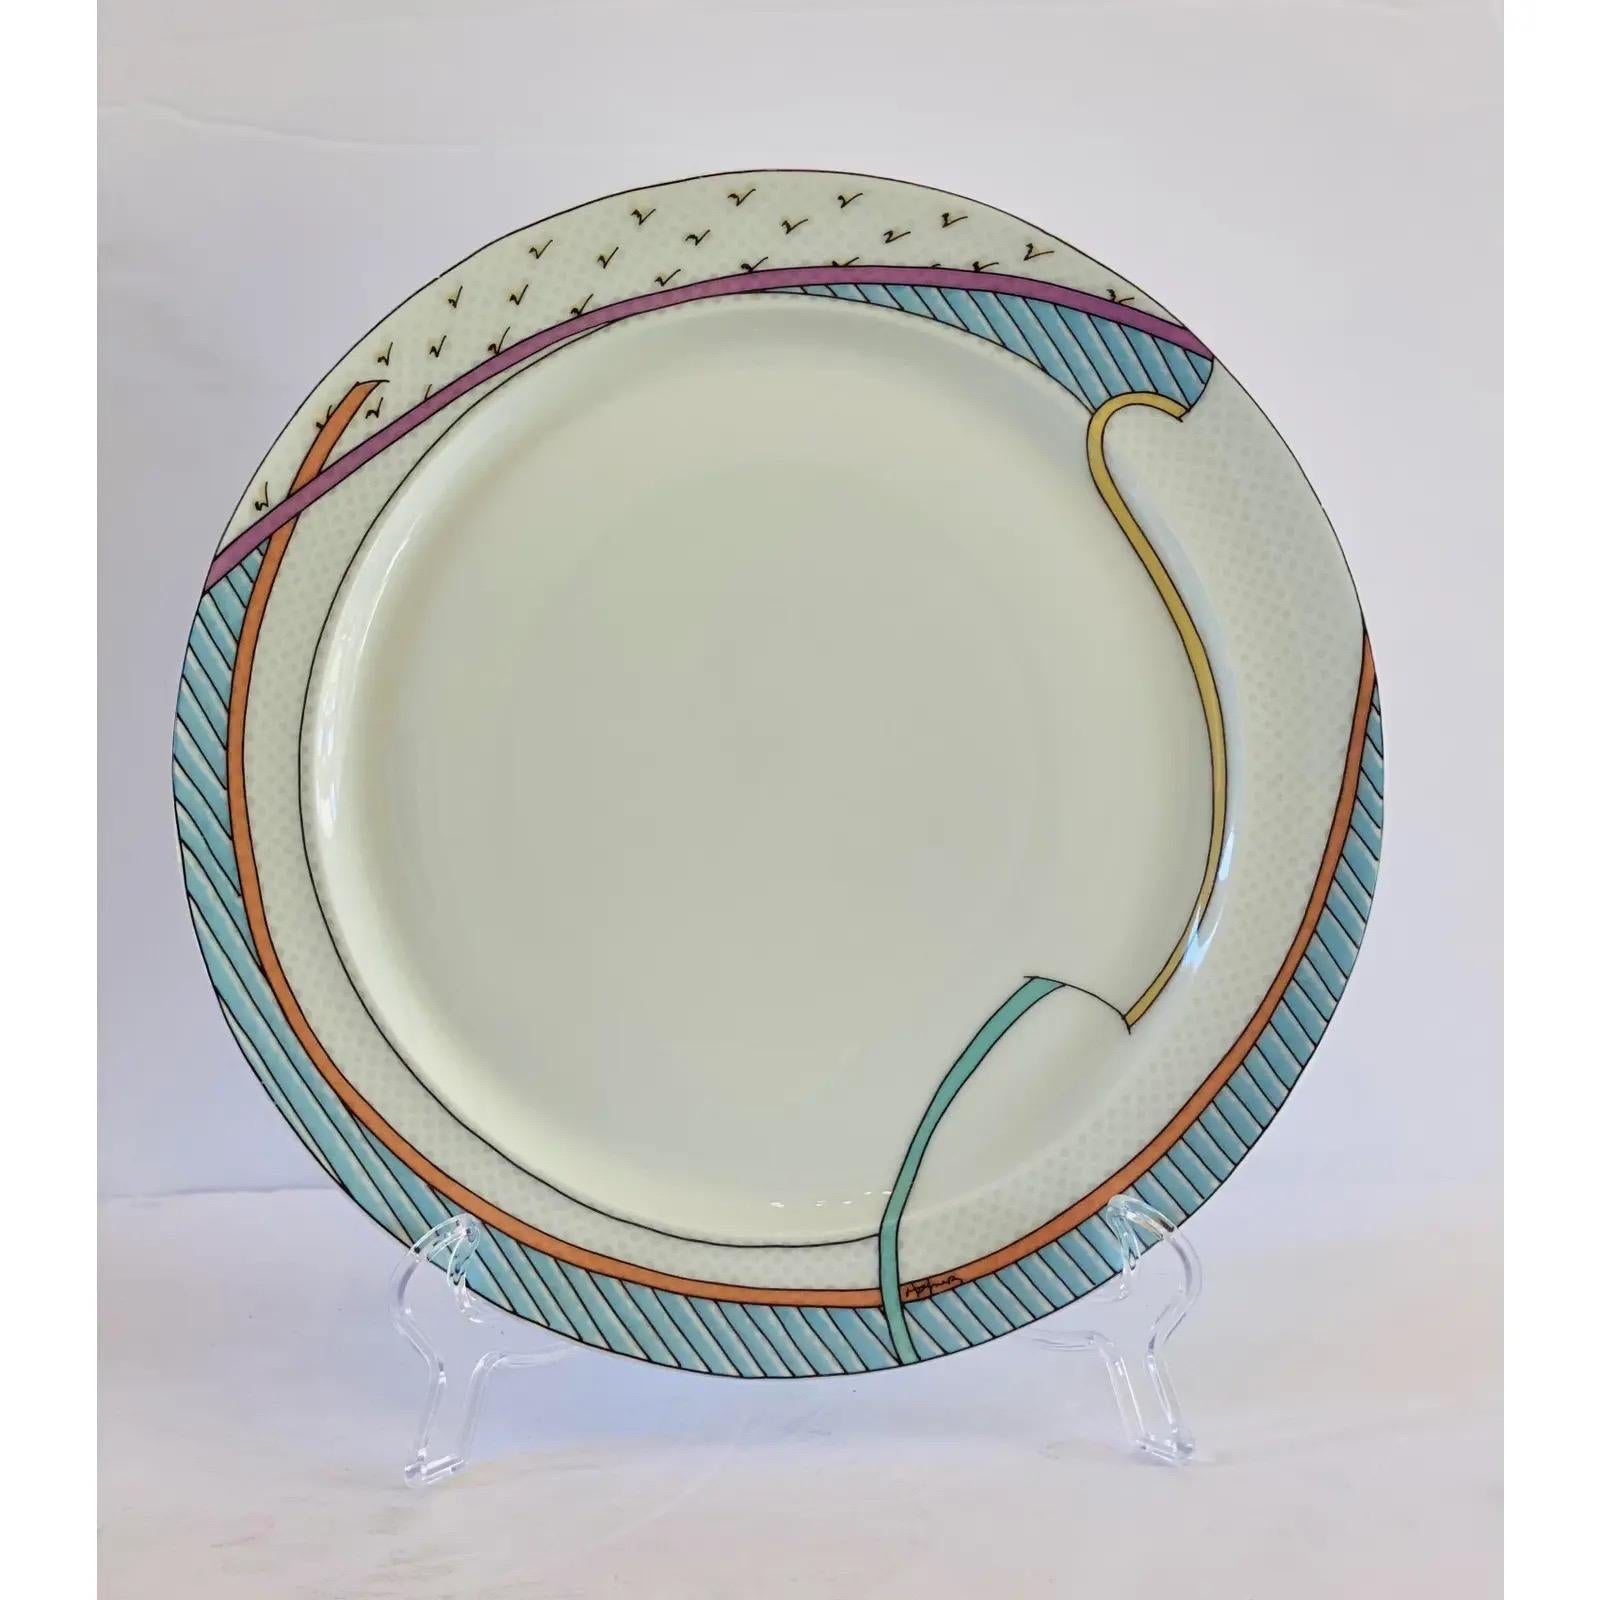 We are very pleased to offer a rare, one-of-a-kind set by American ceramist and glass artist, Dorothy Hafner, for Rosenthal, circa the 1980s. This set includes one large serving plate and one footed serving bowl. In excellent condition and signed.